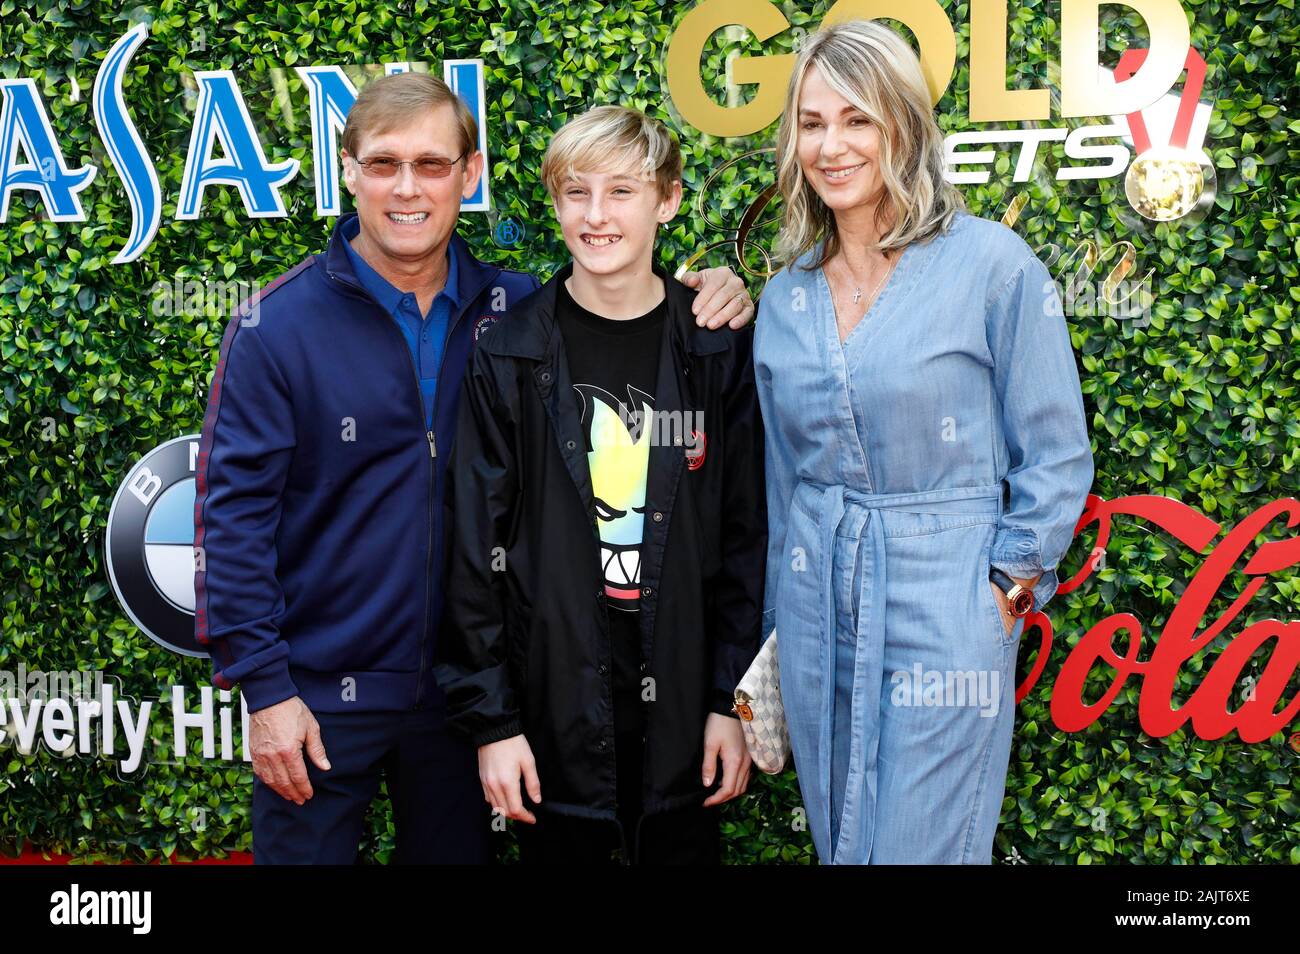 Los Angeles, USA. 04th Jan, 2020. Bart Conner, his wife Nadia Comaneci uand his son Dylan Conner attending the 7th Annual Gold Meets Golden Event 2020 at the Virginia Robinson Gardens and Estate on January 4, 2020 in Los Angeles, California. Credit: Geisler-Fotopress GmbH/Alamy Live News Stock Photo